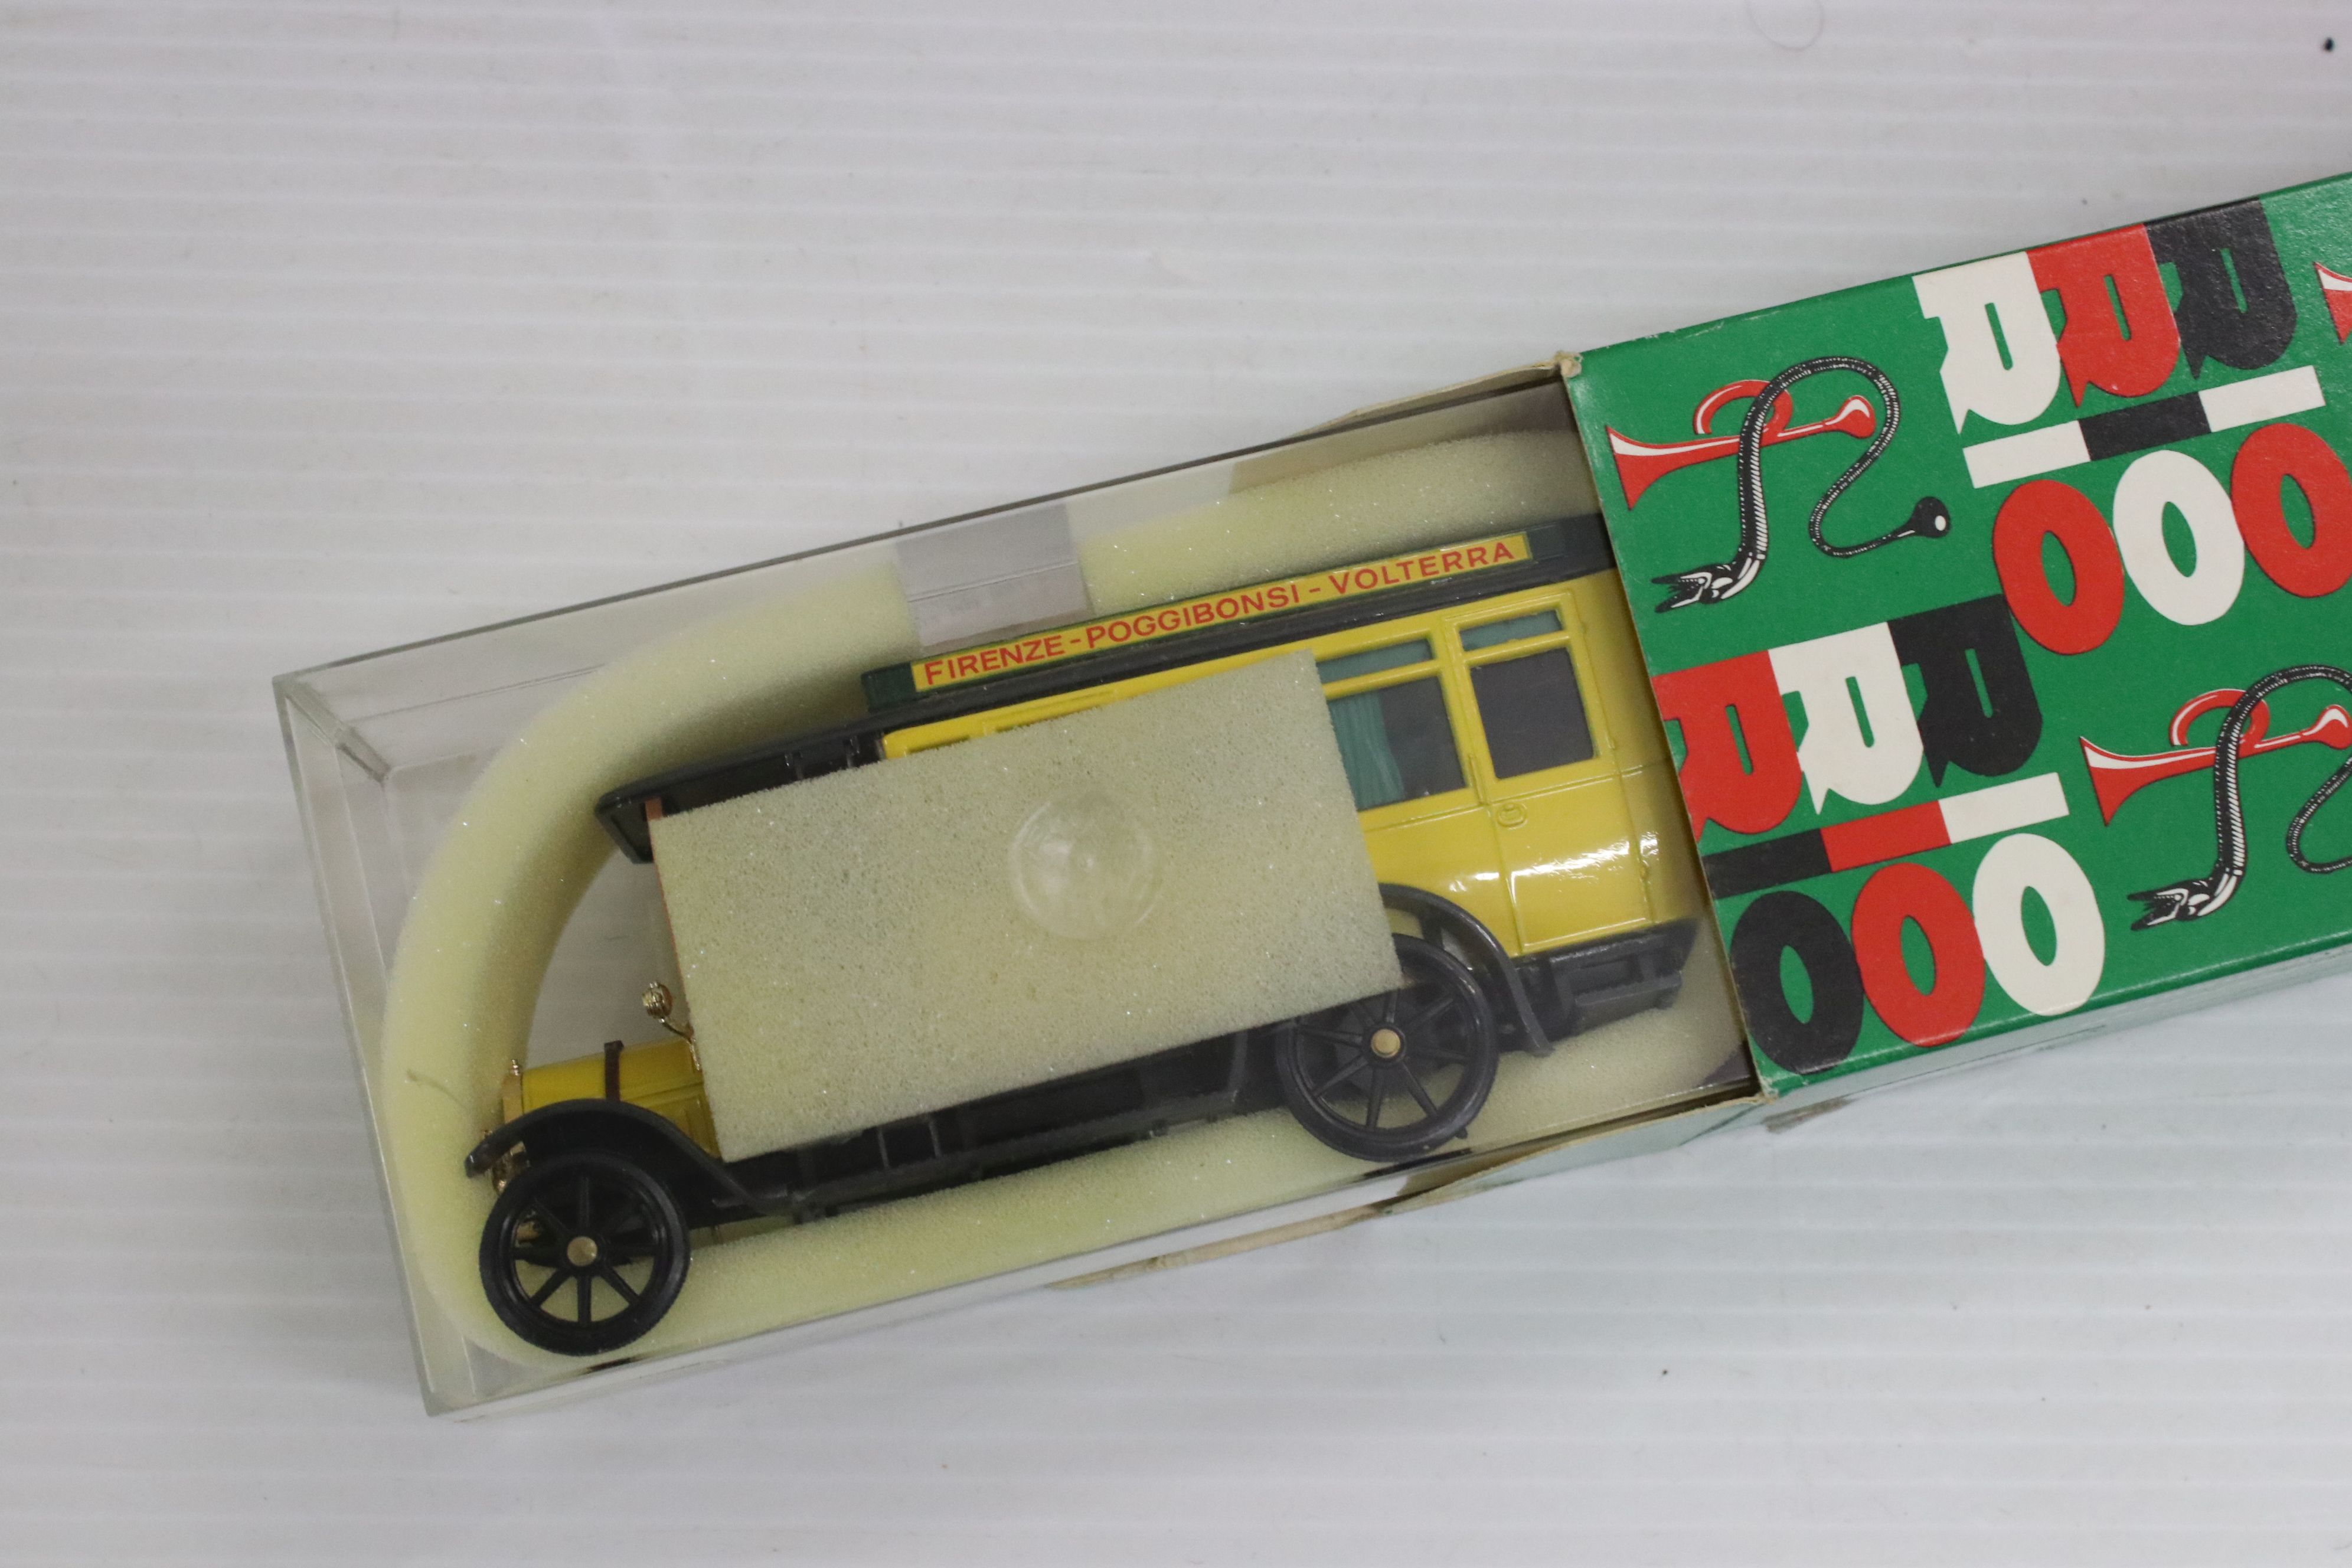 10 x Boxed diecast models to include 4 x Siku featuring 3121 Linienbus and 3 x 3814 MB-Reisebus, 2 x - Image 2 of 6